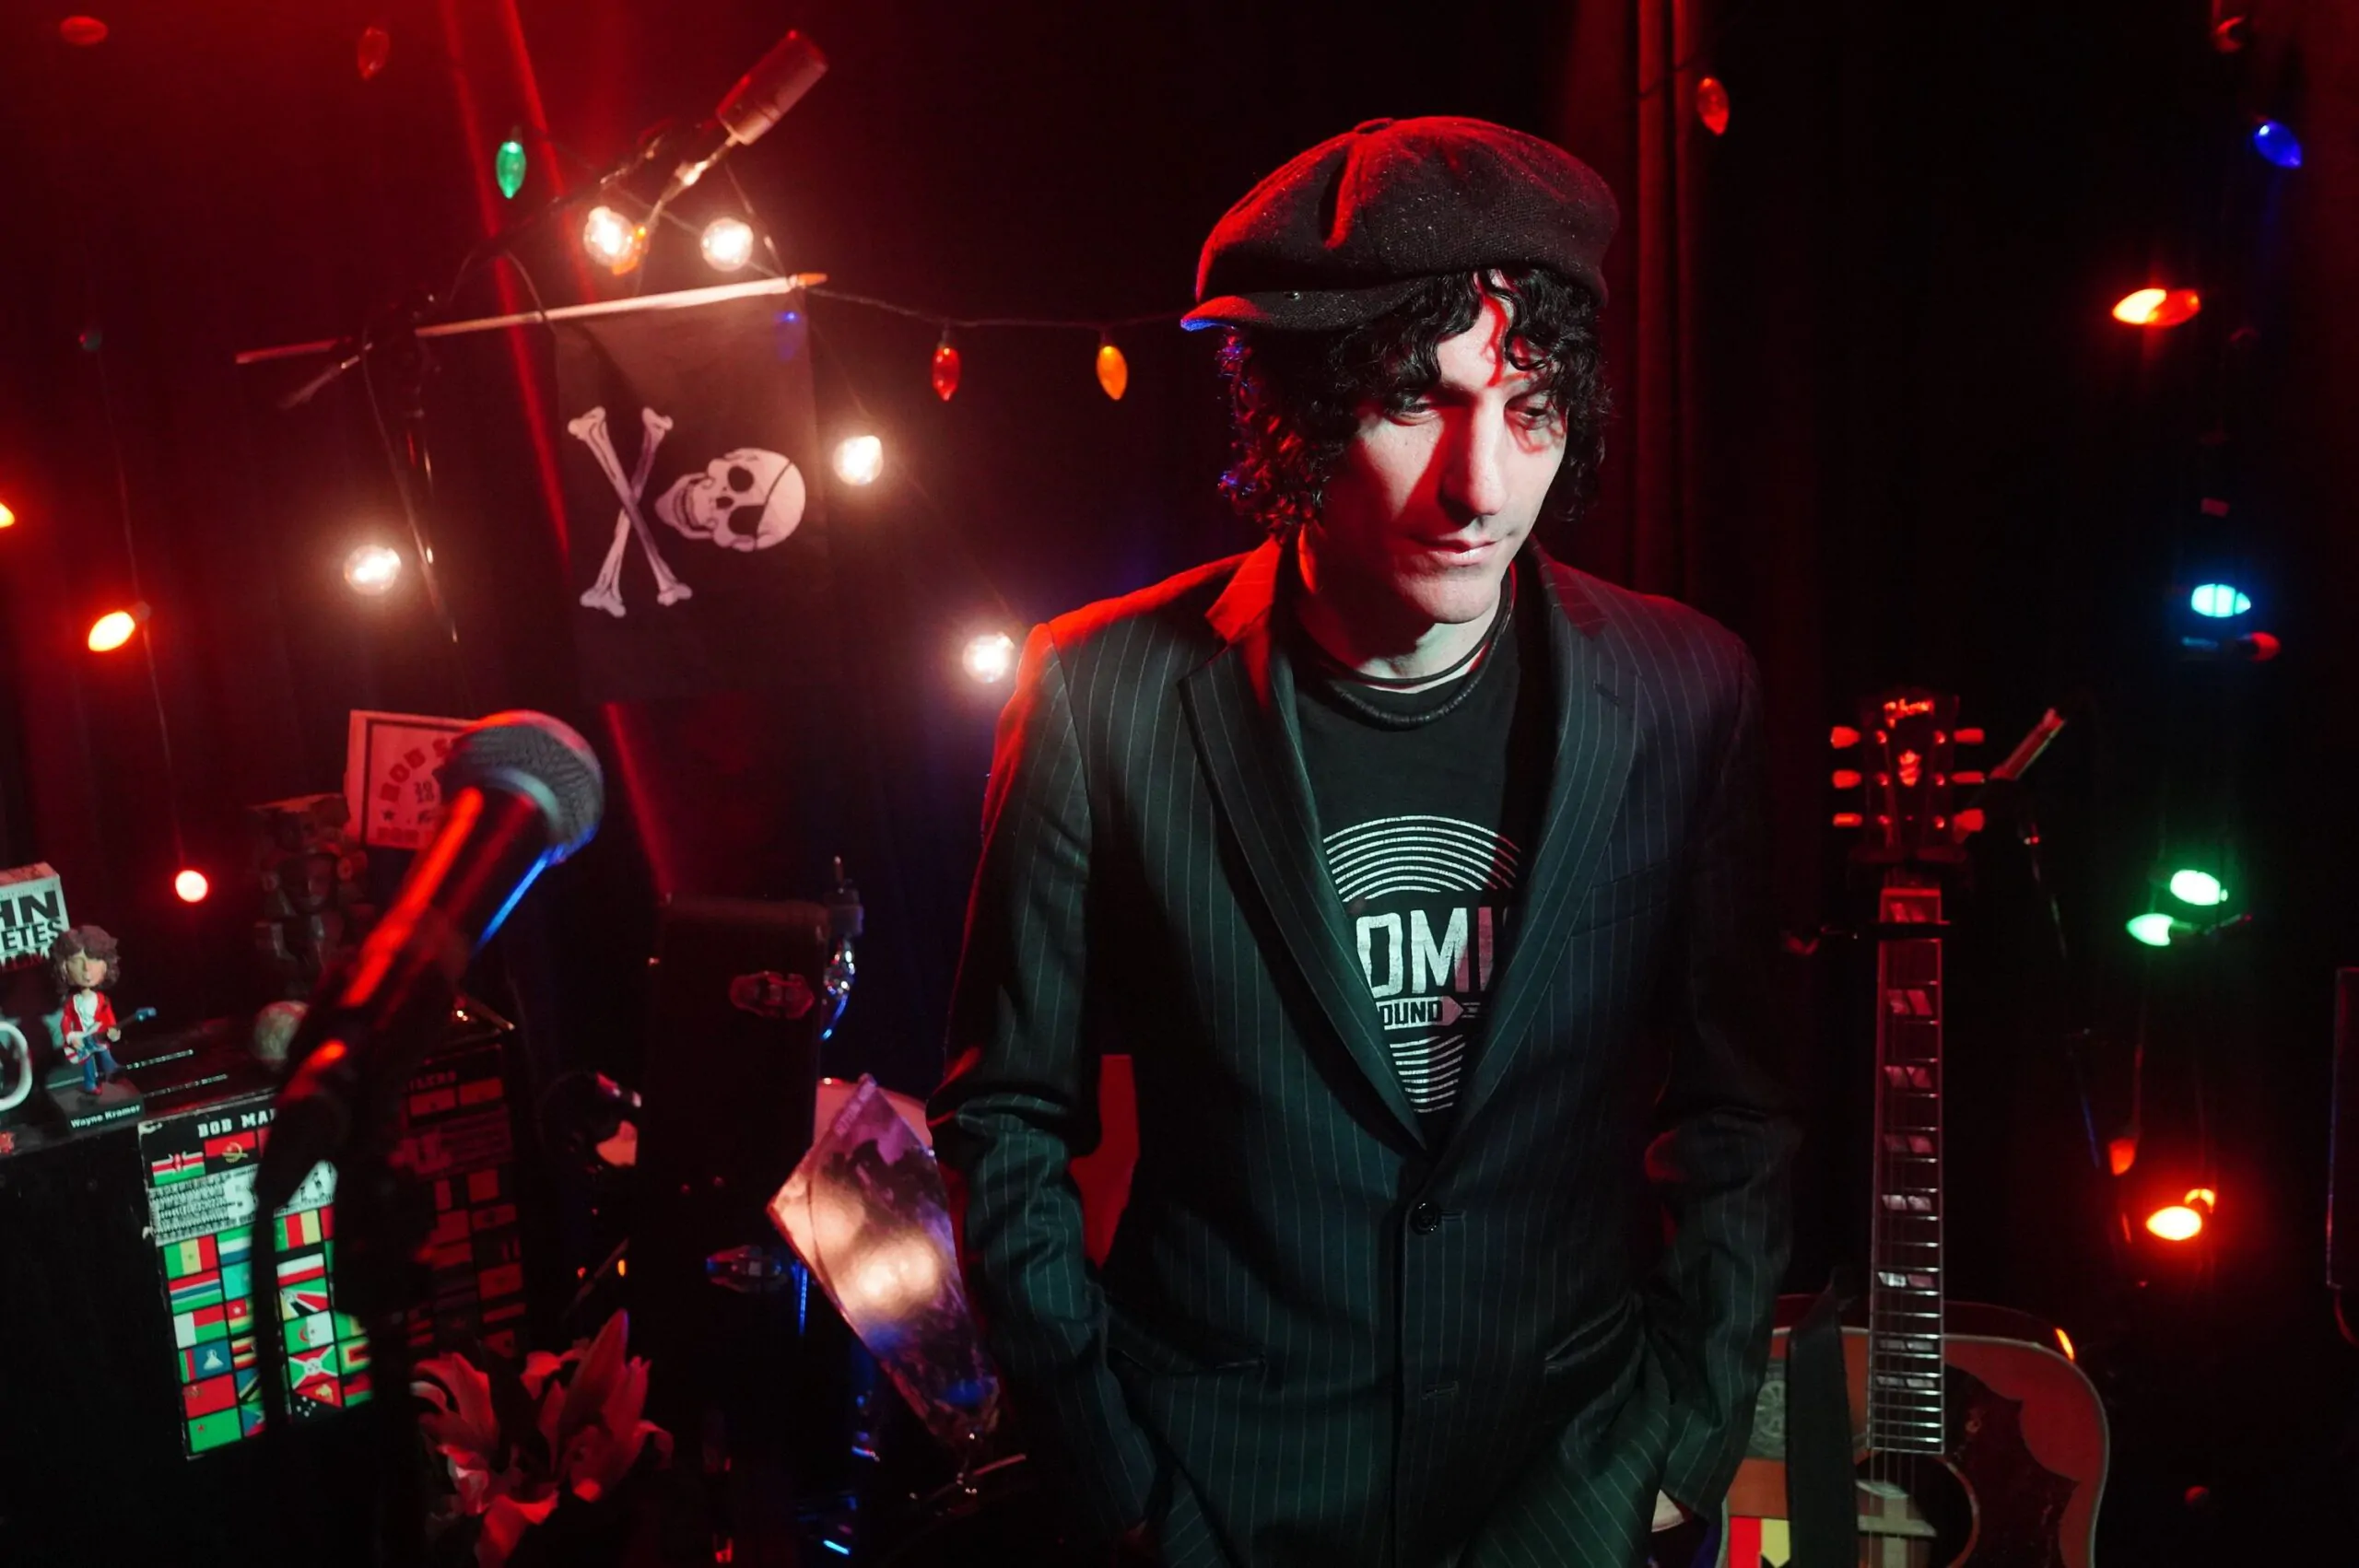 JESSE MALIN announces his new double album ‘Sad and Beautiful World’ – out September 24th